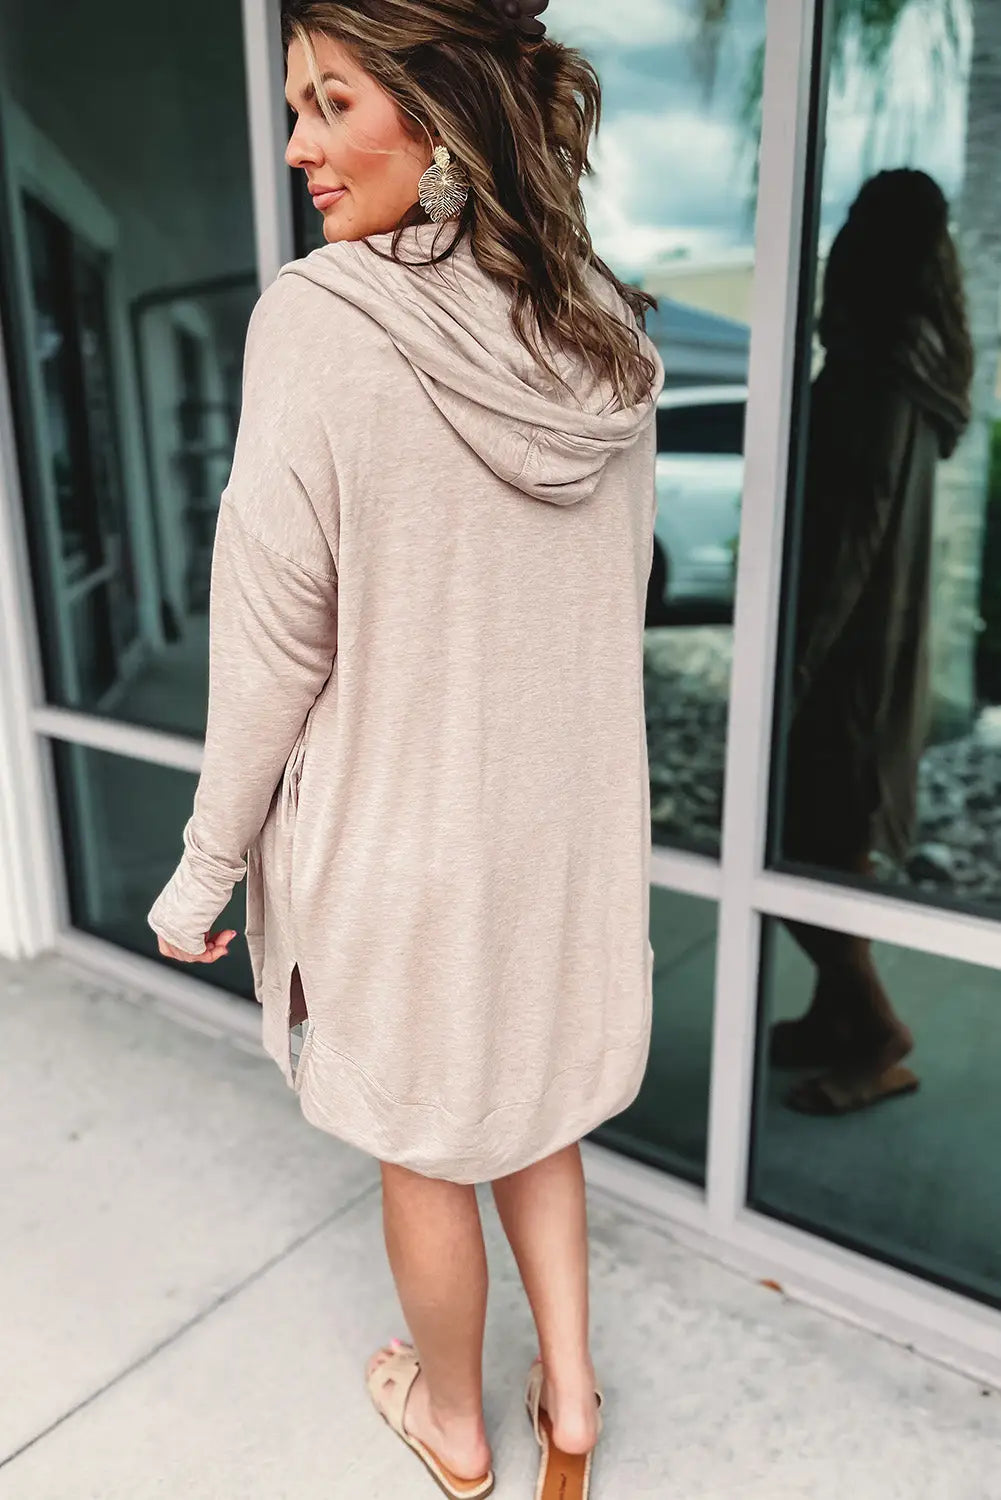 Apricot open front hooded long cardigan with slits - tops